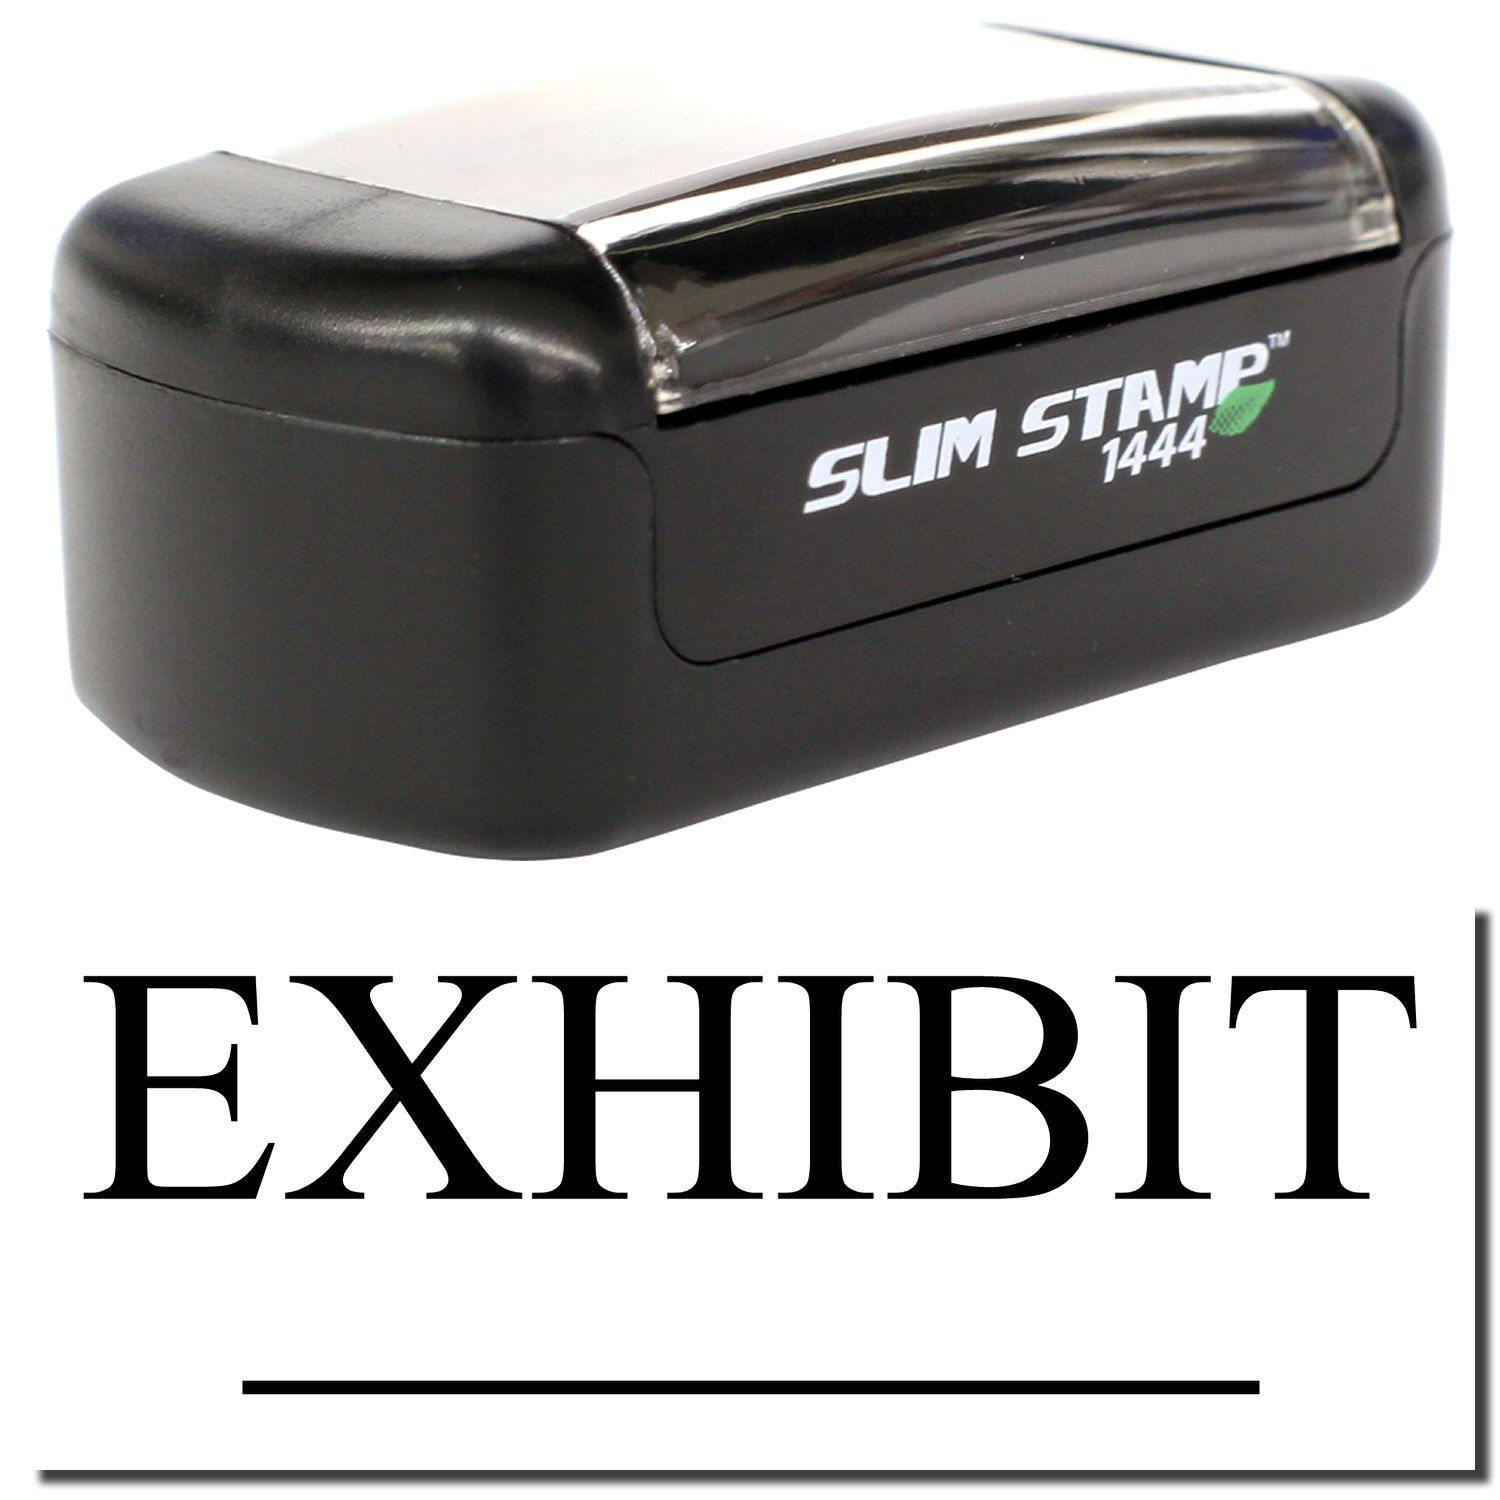 A stock office pre-inked stamp with a stamped image showing how the text "EXHIBIT" with a line underneath the text is displayed after stamping.